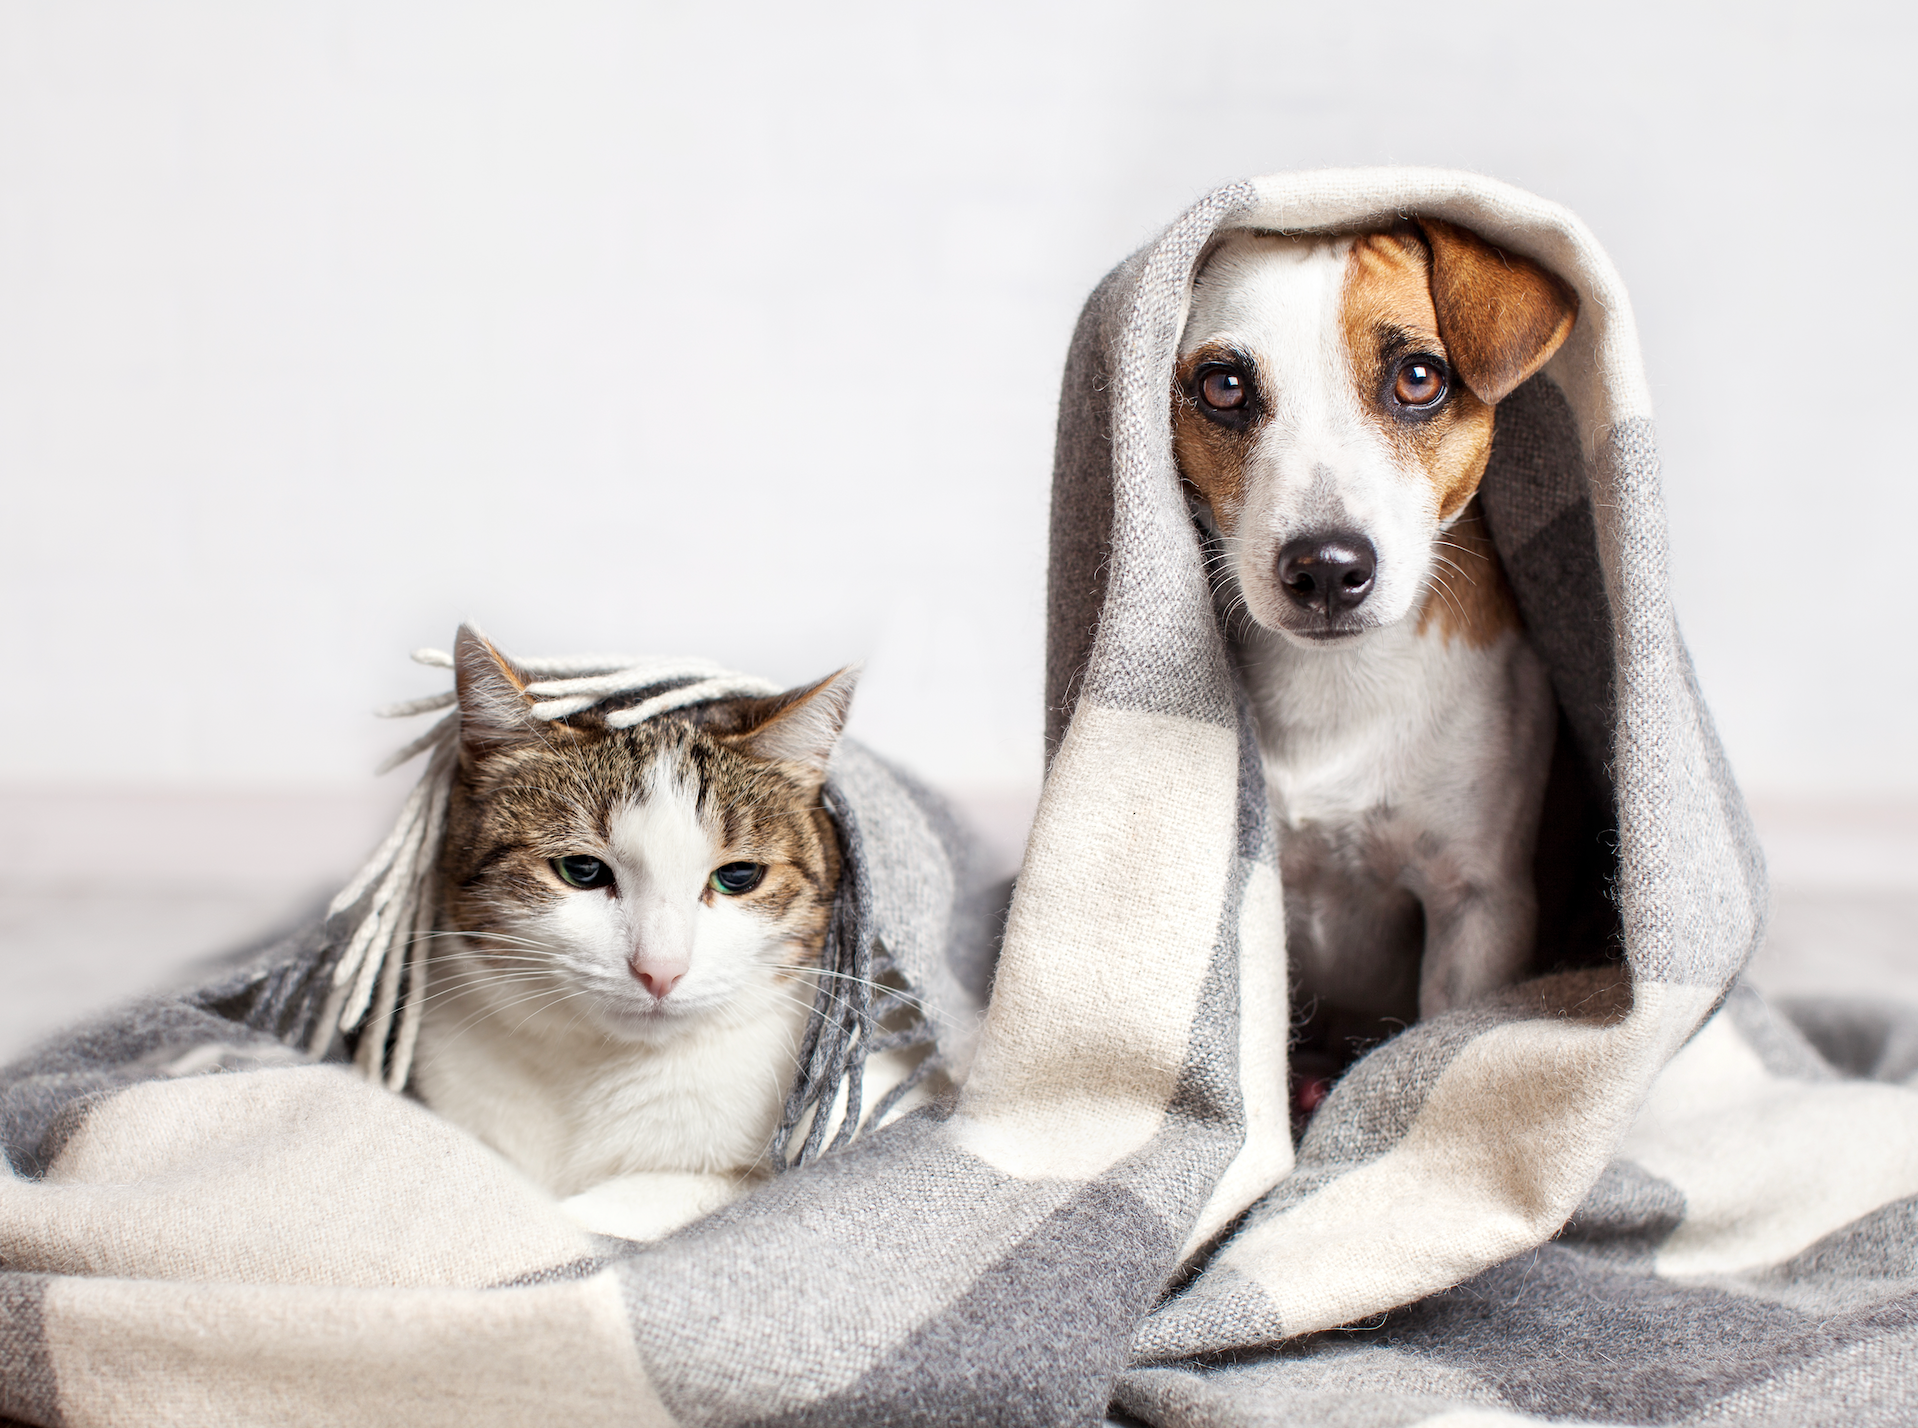 A dog and cat snuggled in a blanket.